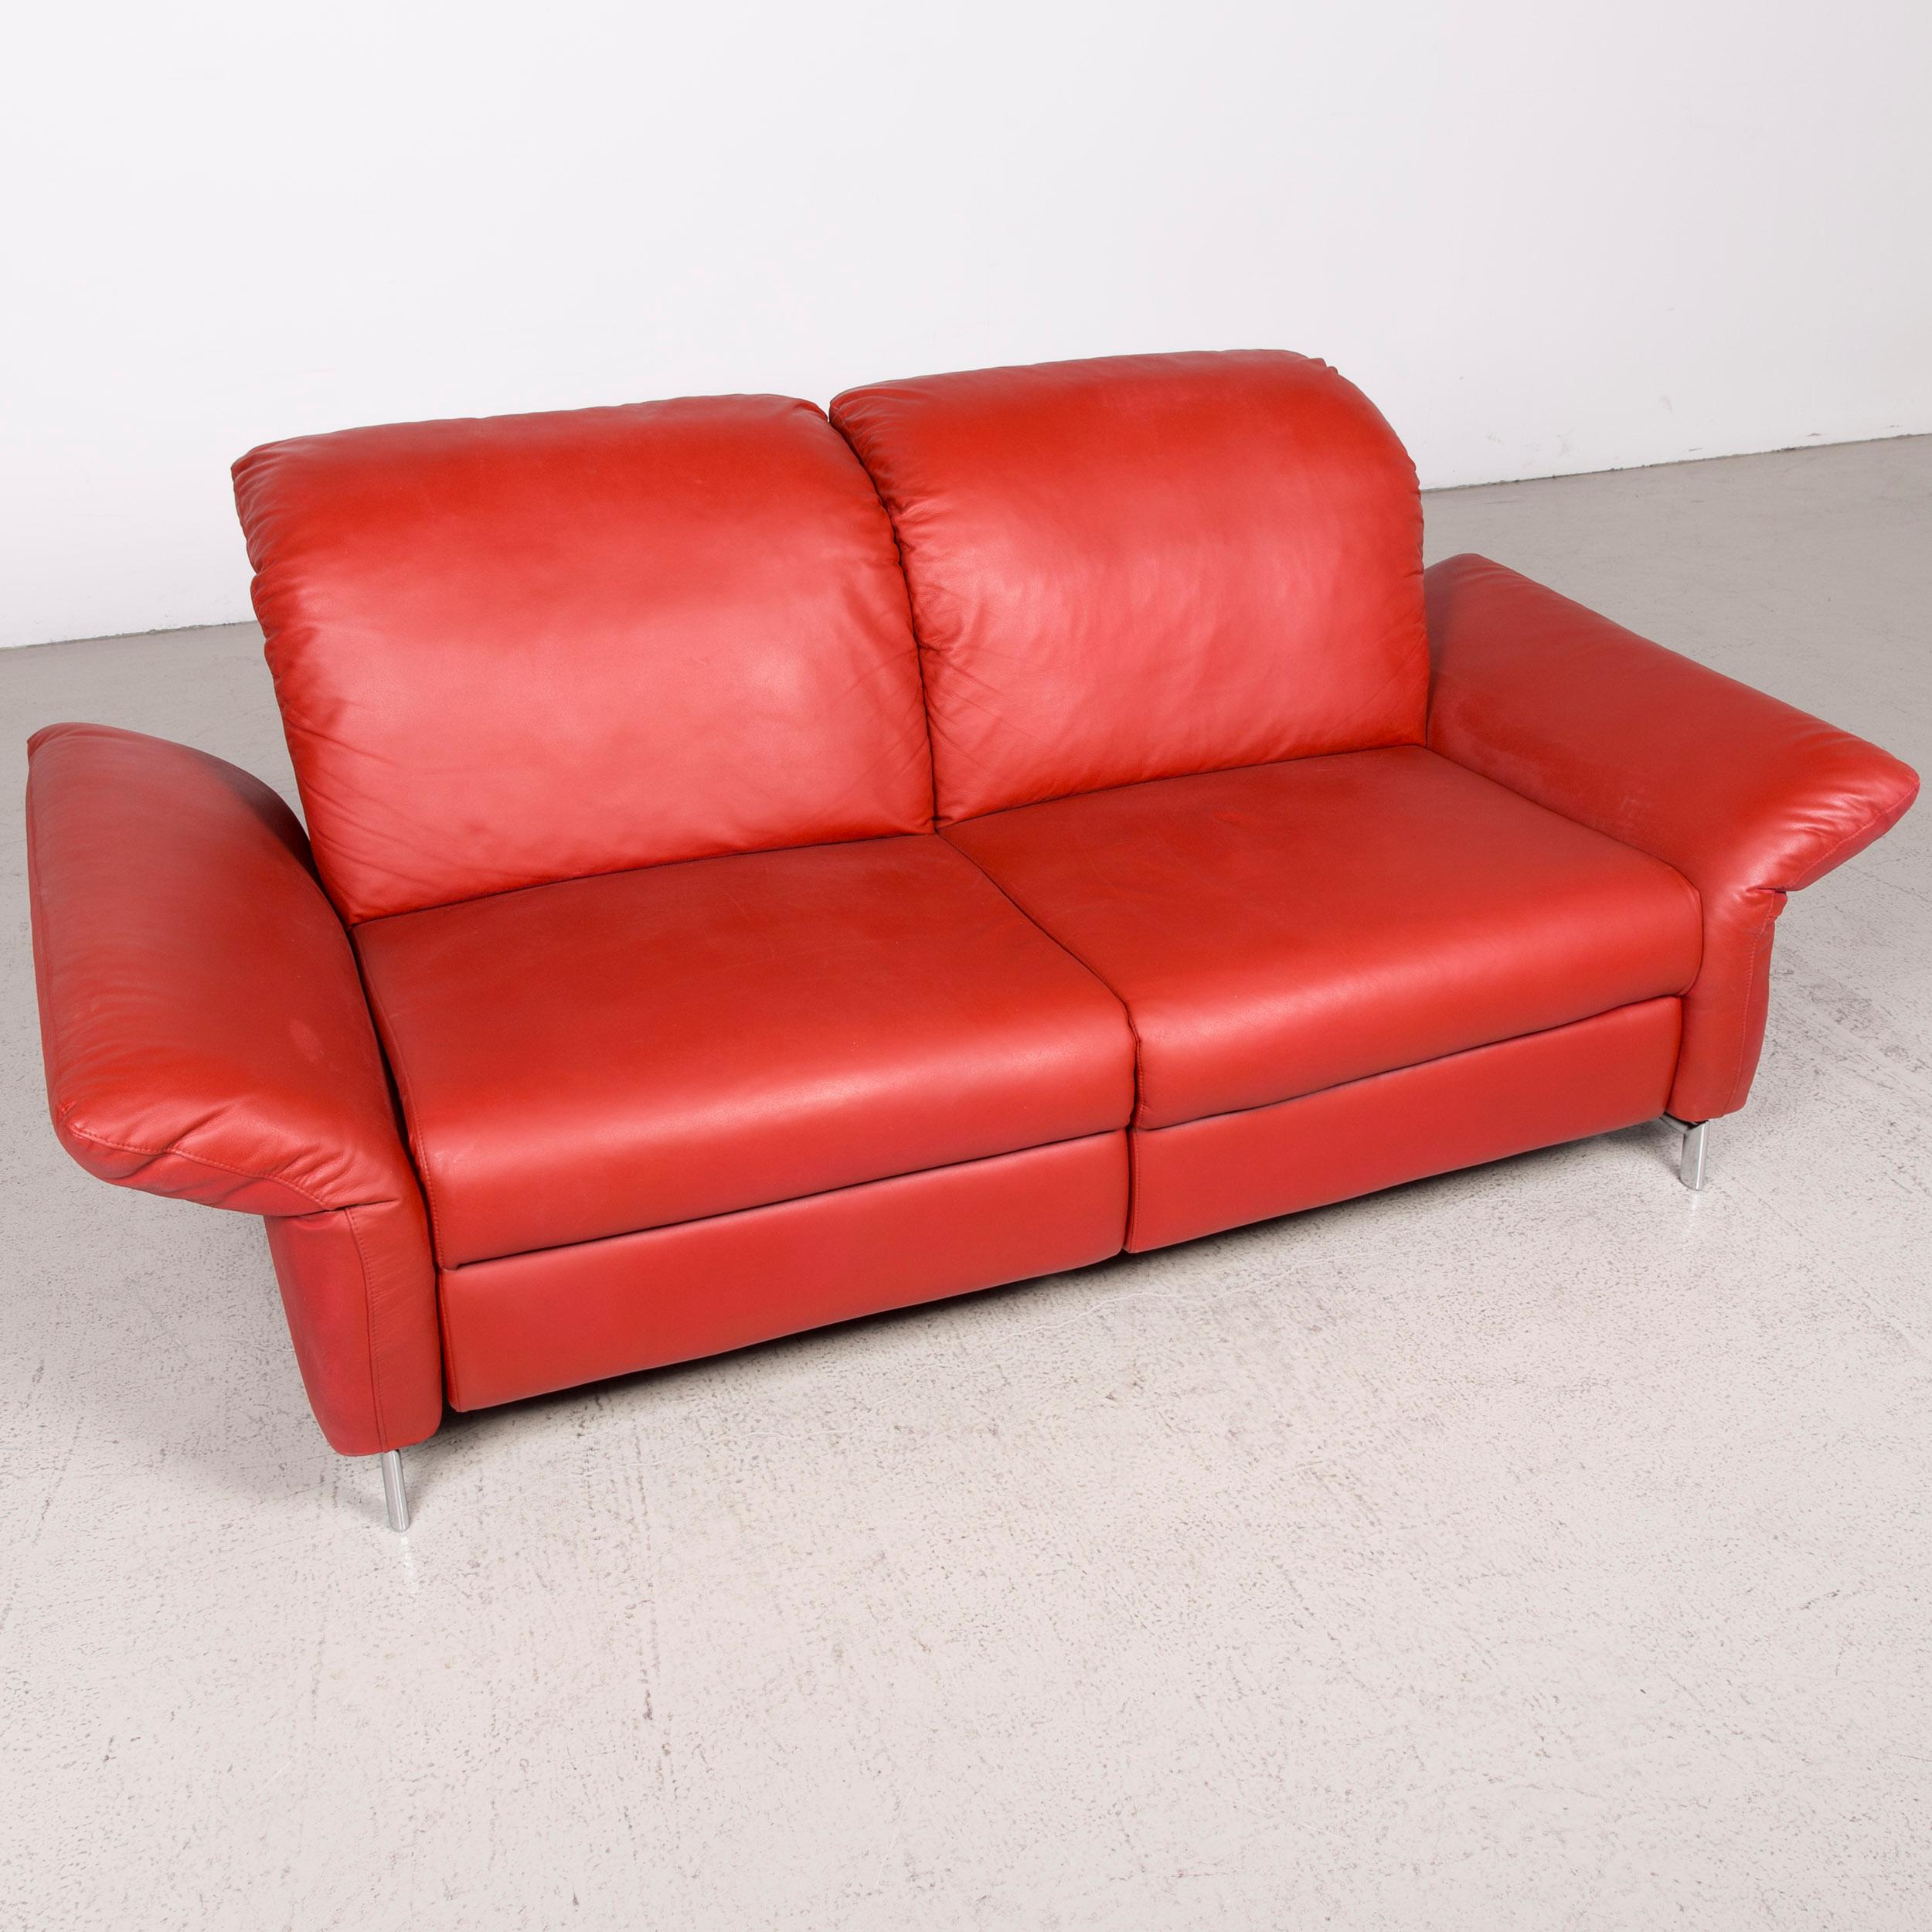 Contemporary Willi Schillig Siena Designer Leather Sofa Red Real Leather Dreisityer Couch For Sale